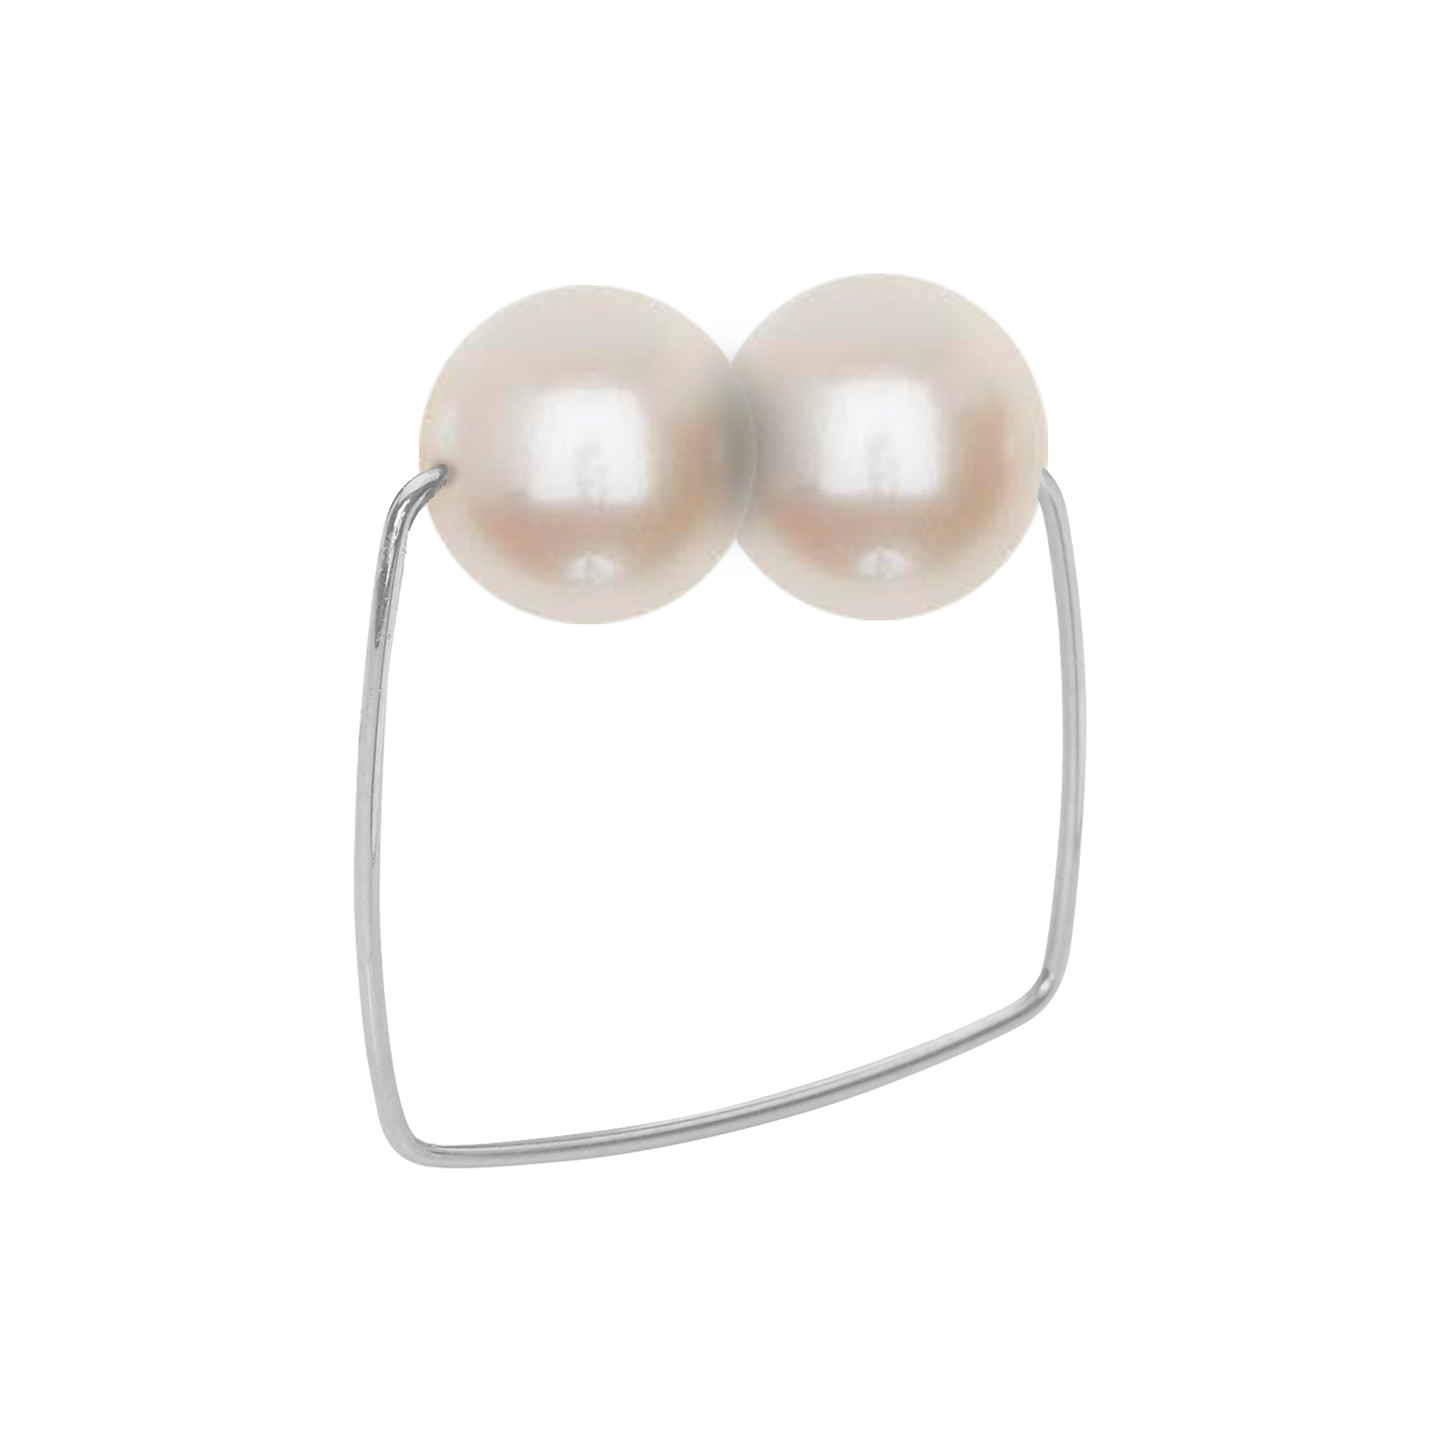 Square Ring with Round Fresh Water Pearls (12mm x 9mm)